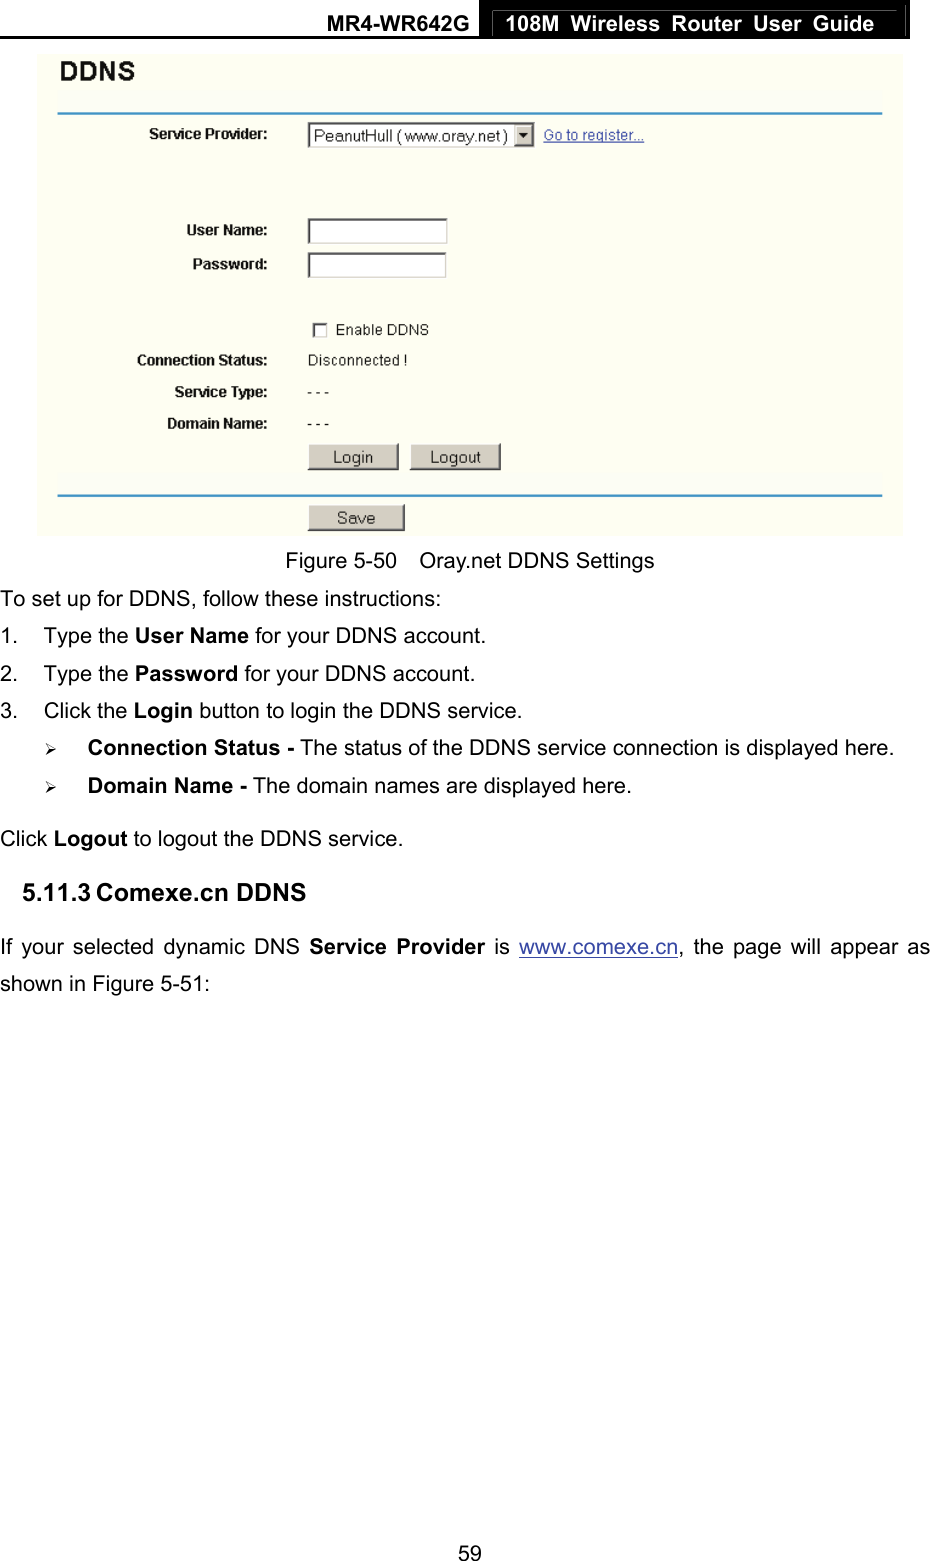 MR4-WR642G 108M Wireless Router User Guide   59 Figure 5-50    Oray.net DDNS Settings To set up for DDNS, follow these instructions: 1. Type the User Name for your DDNS account.   2. Type the Password for your DDNS account.   3. Click the Login button to login the DDNS service.   ¾ Connection Status - The status of the DDNS service connection is displayed here. ¾ Domain Name - The domain names are displayed here. Click Logout to logout the DDNS service. 5.11.3 Comexe.cn DDNS If your selected dynamic DNS Service Provider is www.comexe.cn, the page will appear as shown in Figure 5-51: 